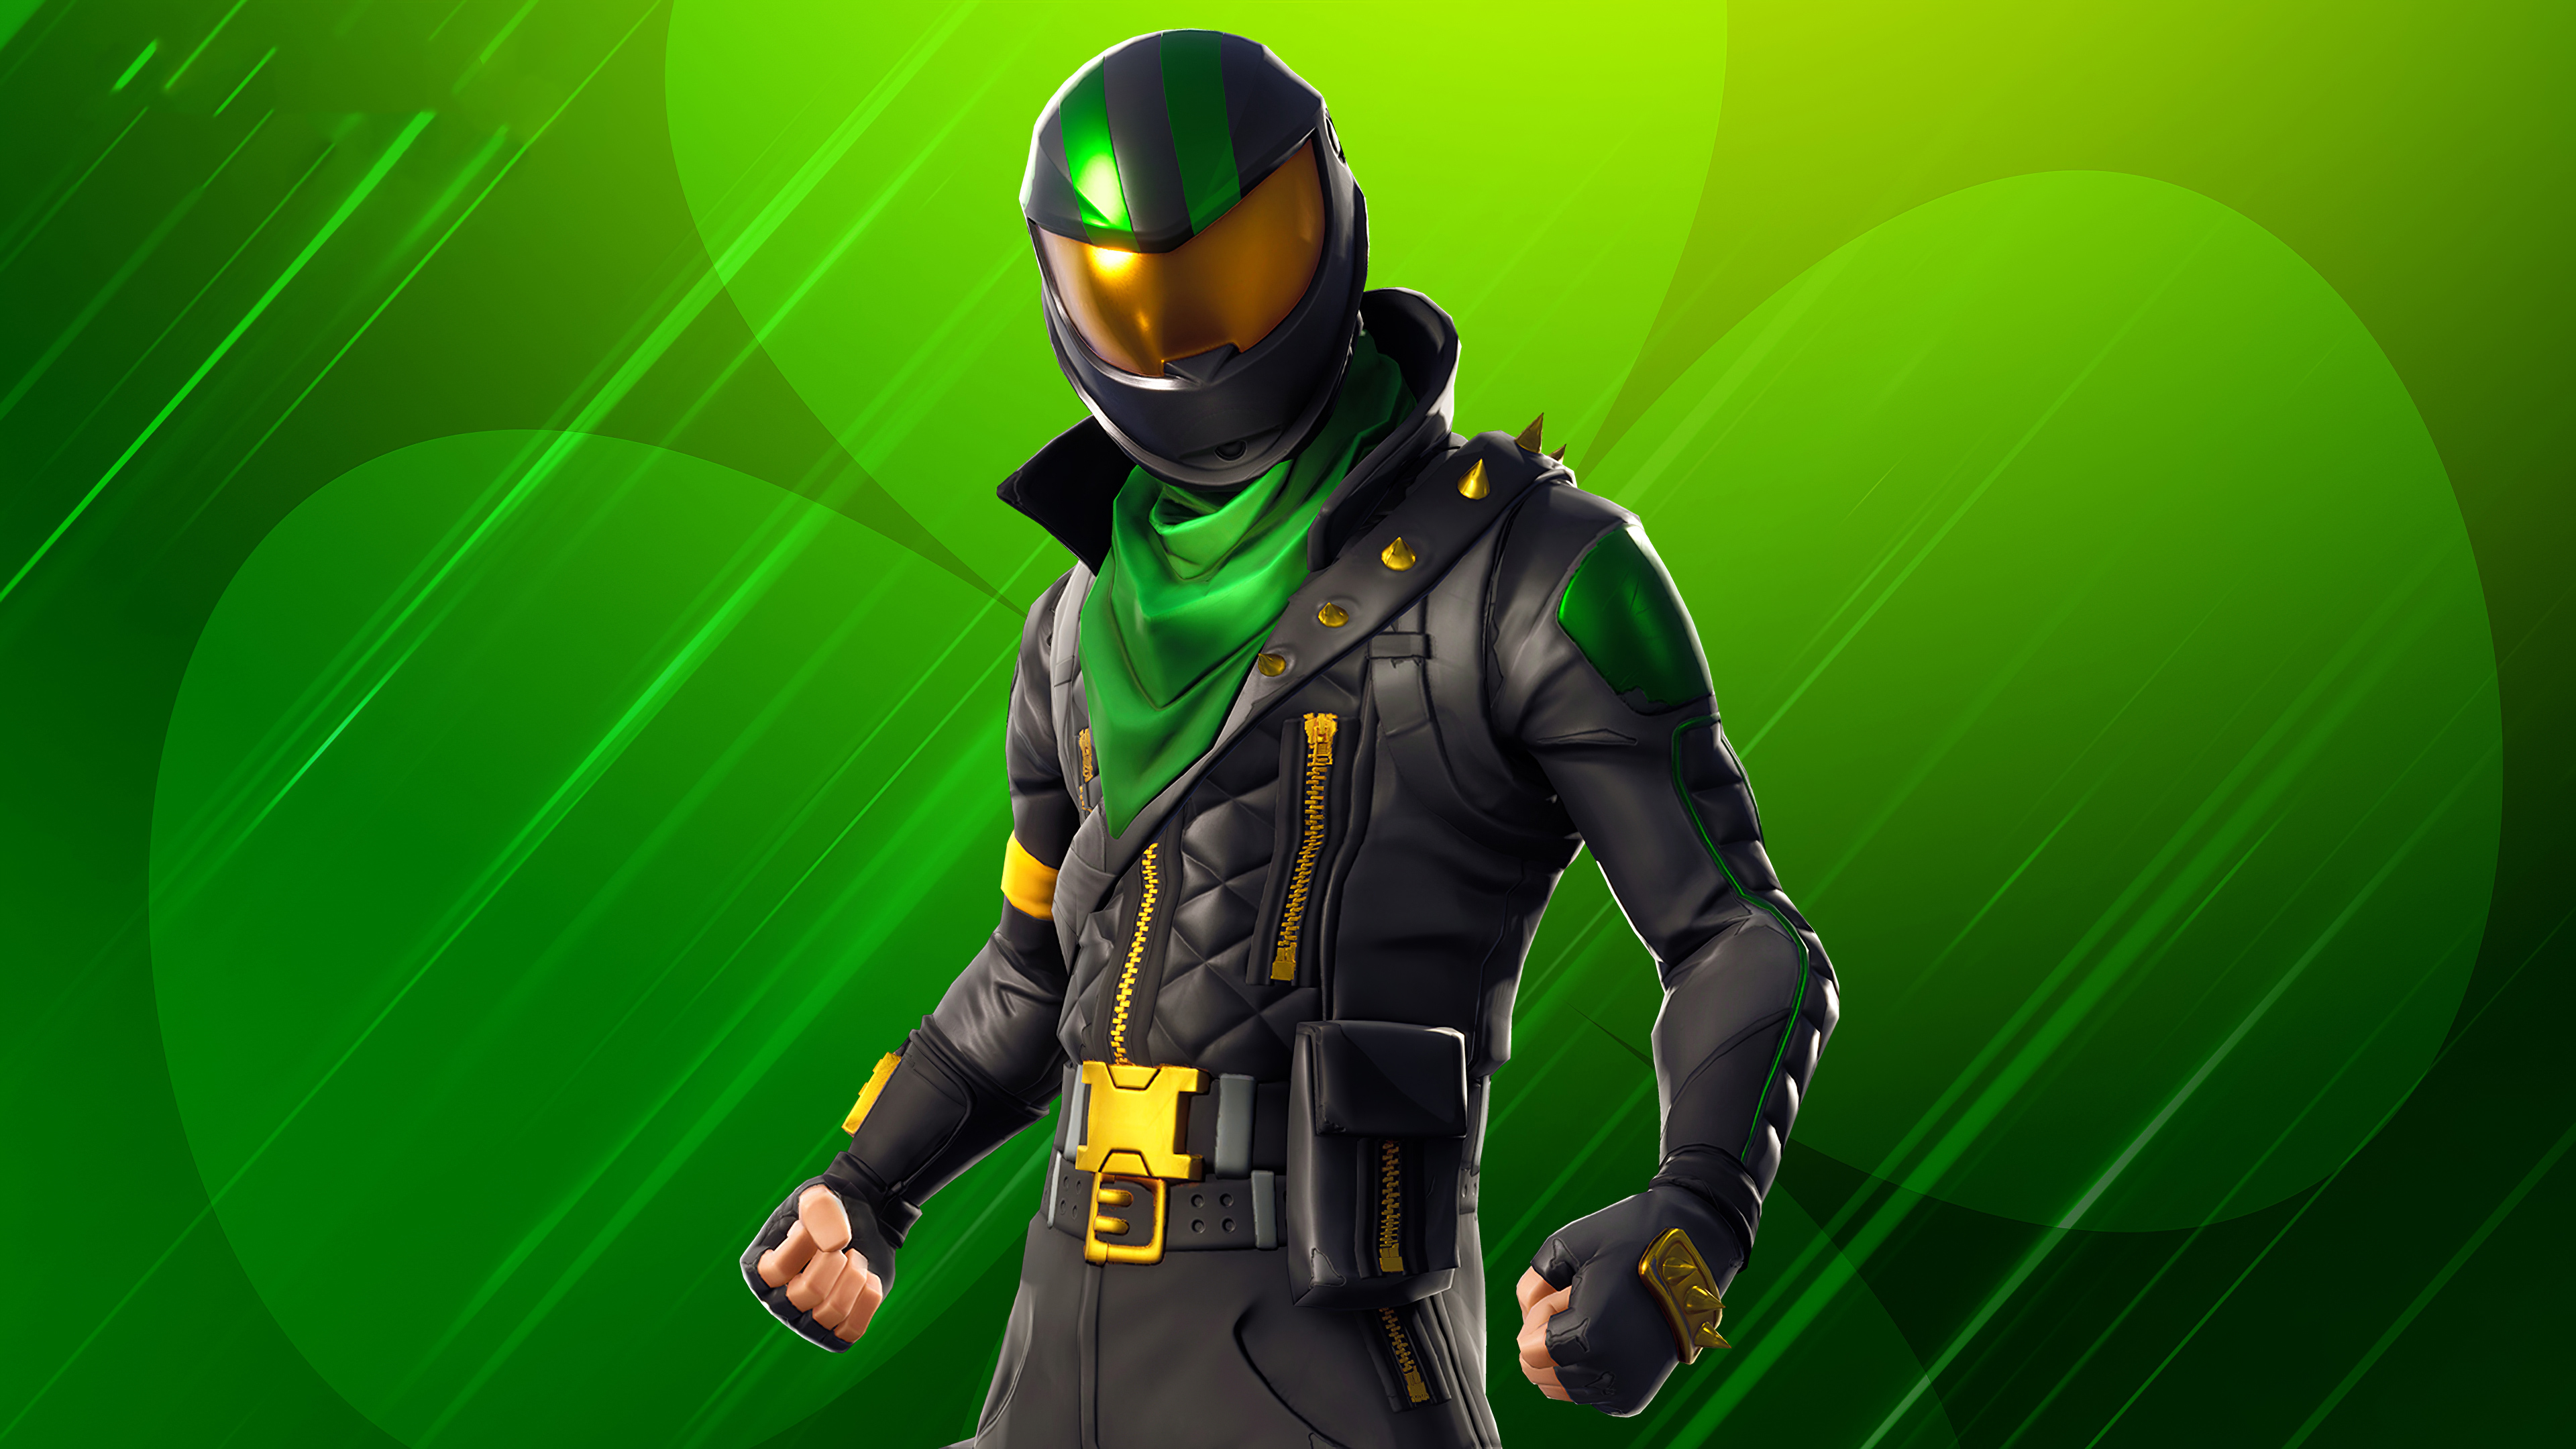 3840x2160202199 Lucky Rider Fortnite 3840x2160202199 Resolution Wallpaper,  HD Games 4K Wallpapers, Images, Photos and Background - Wallpapers Den